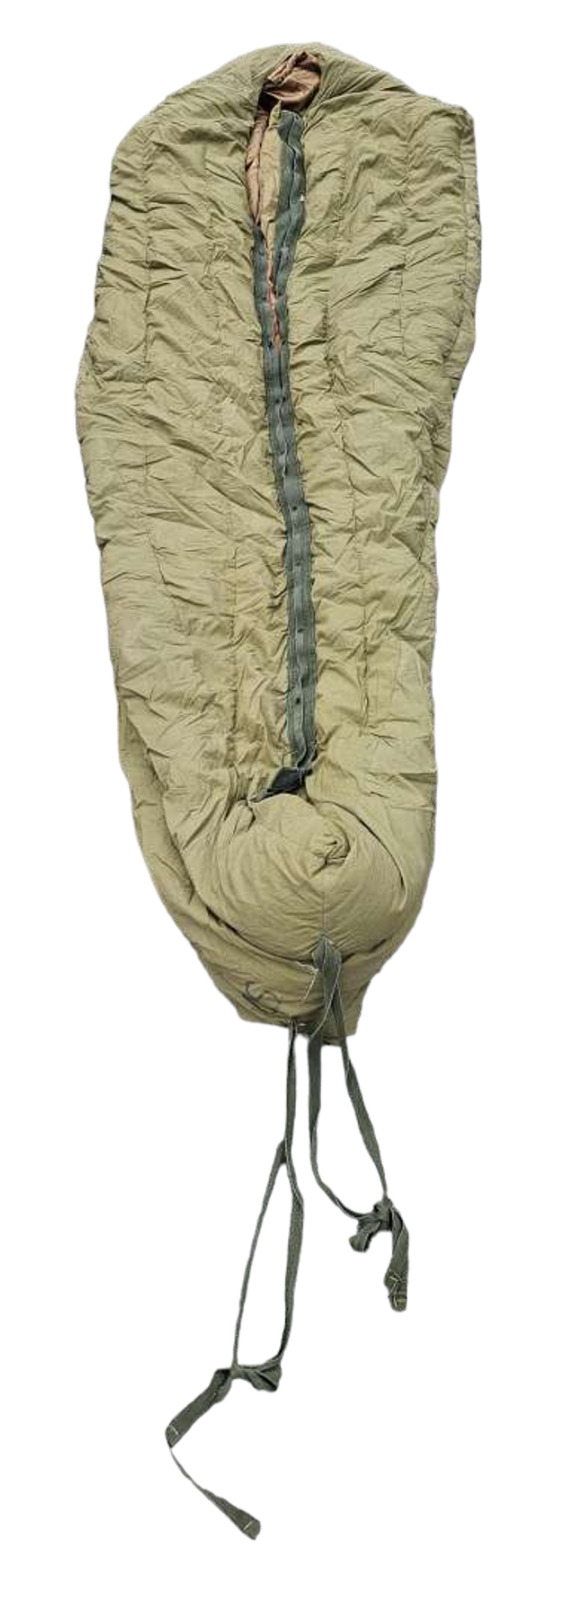 U.S Armed Forces M-1949 Mountain Sleeping Bag W/ Cover